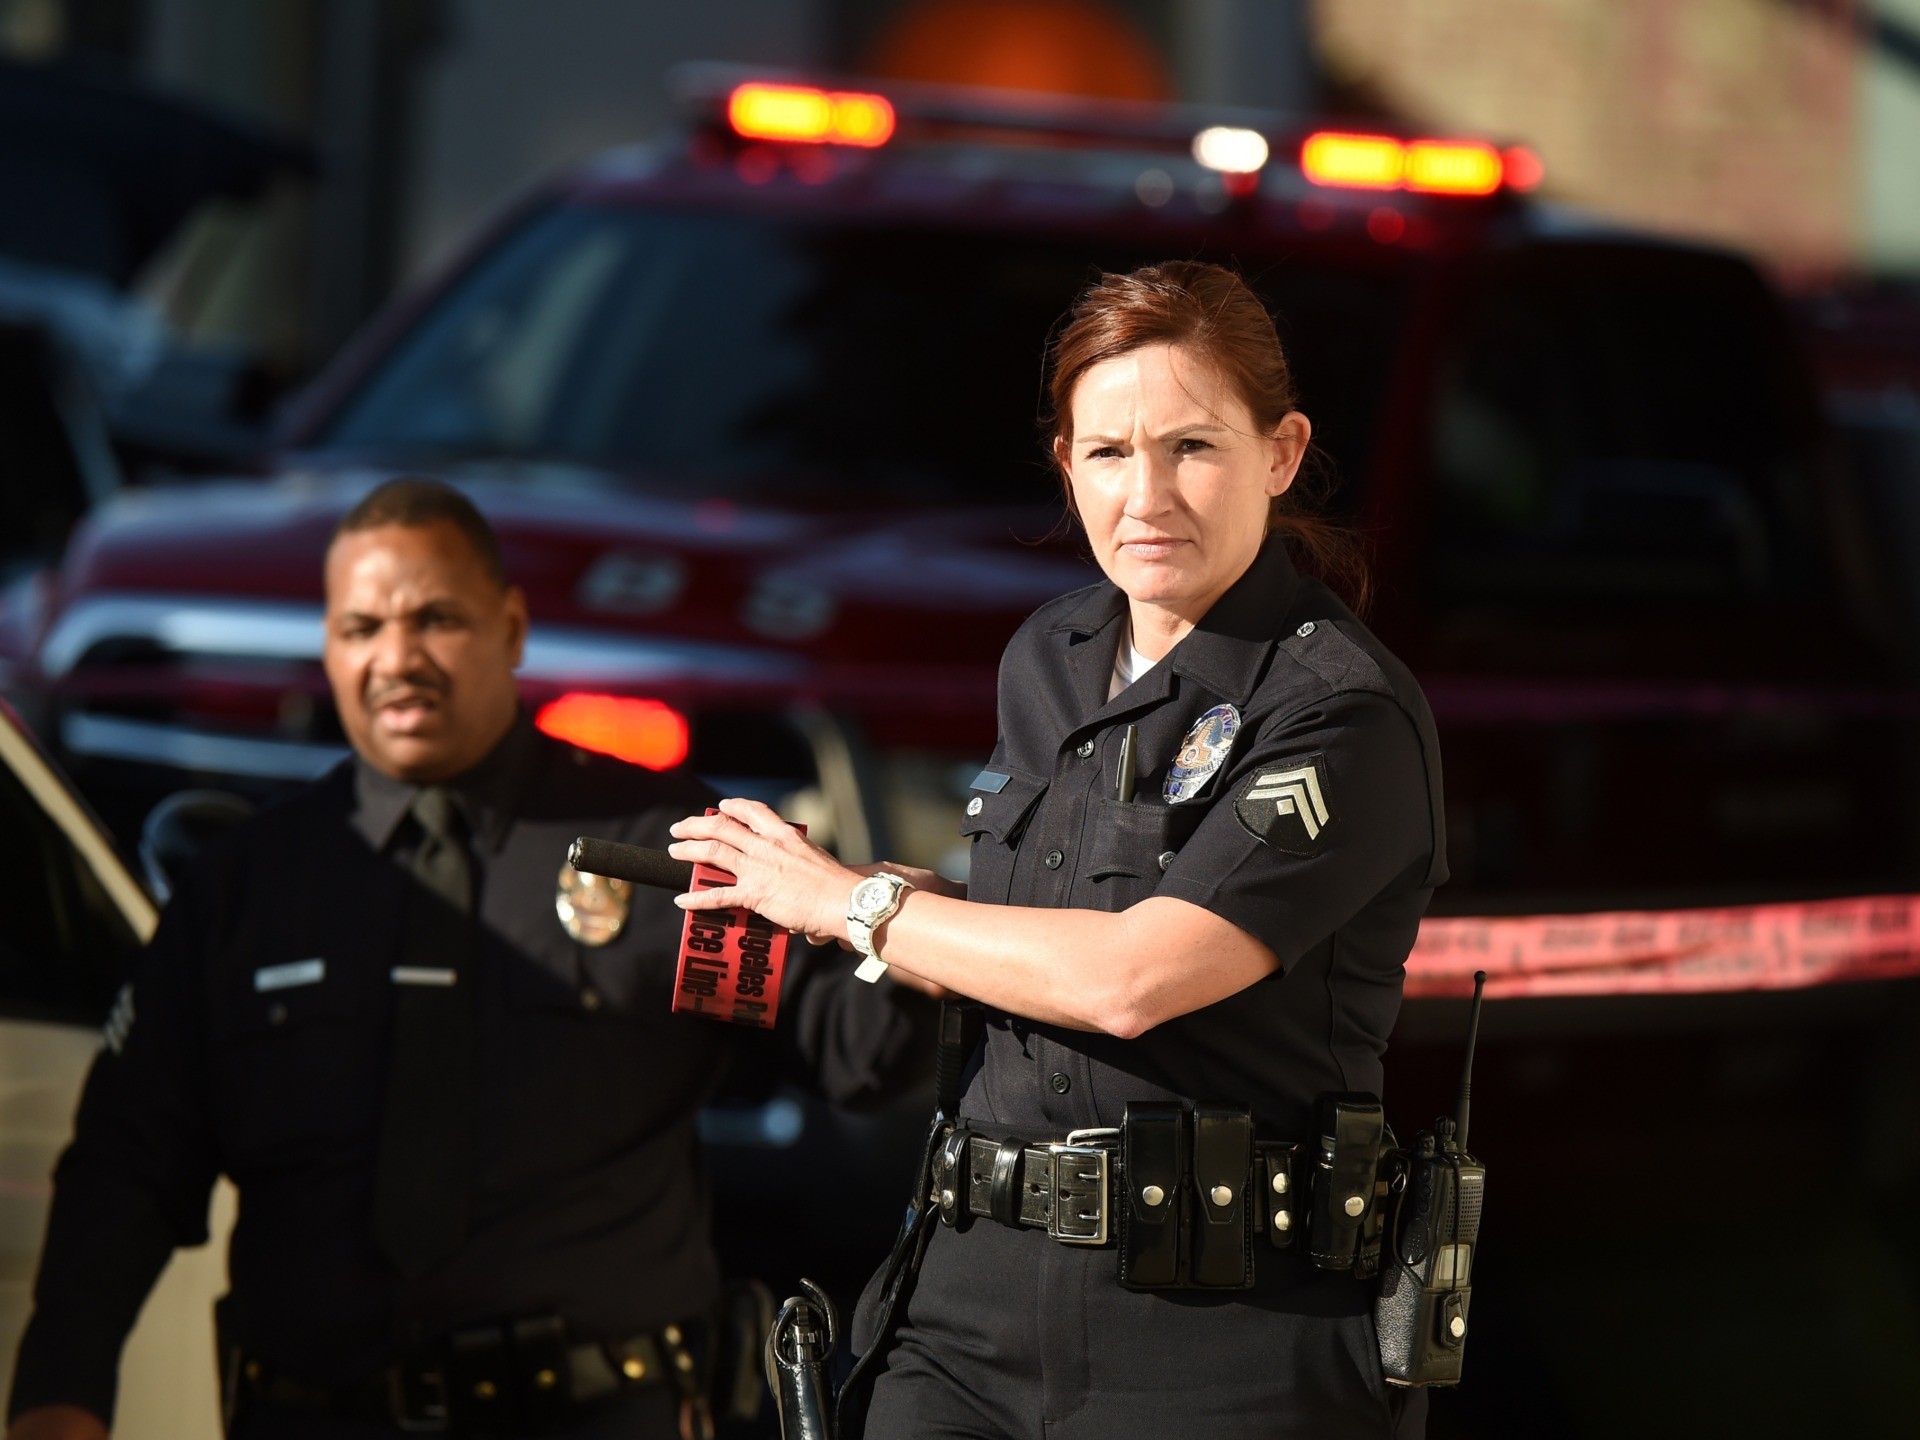 A female police officer uses police tape to cordon off an area outside a Jack in the Box restaurant in Hollywood, California, January 31, 2017, after police shot and killed a knife-wielding suspect inside the restaurant following a series of stabbing in the vicinity. Authorities said a person described only as a male was pronounced dead at the scene, while two of the male stabbing victims have critical injuries and a third was in fair condition. / AFP / Robyn Beck (Photo credit should read ROBYN BECK/AFP via Getty Images)